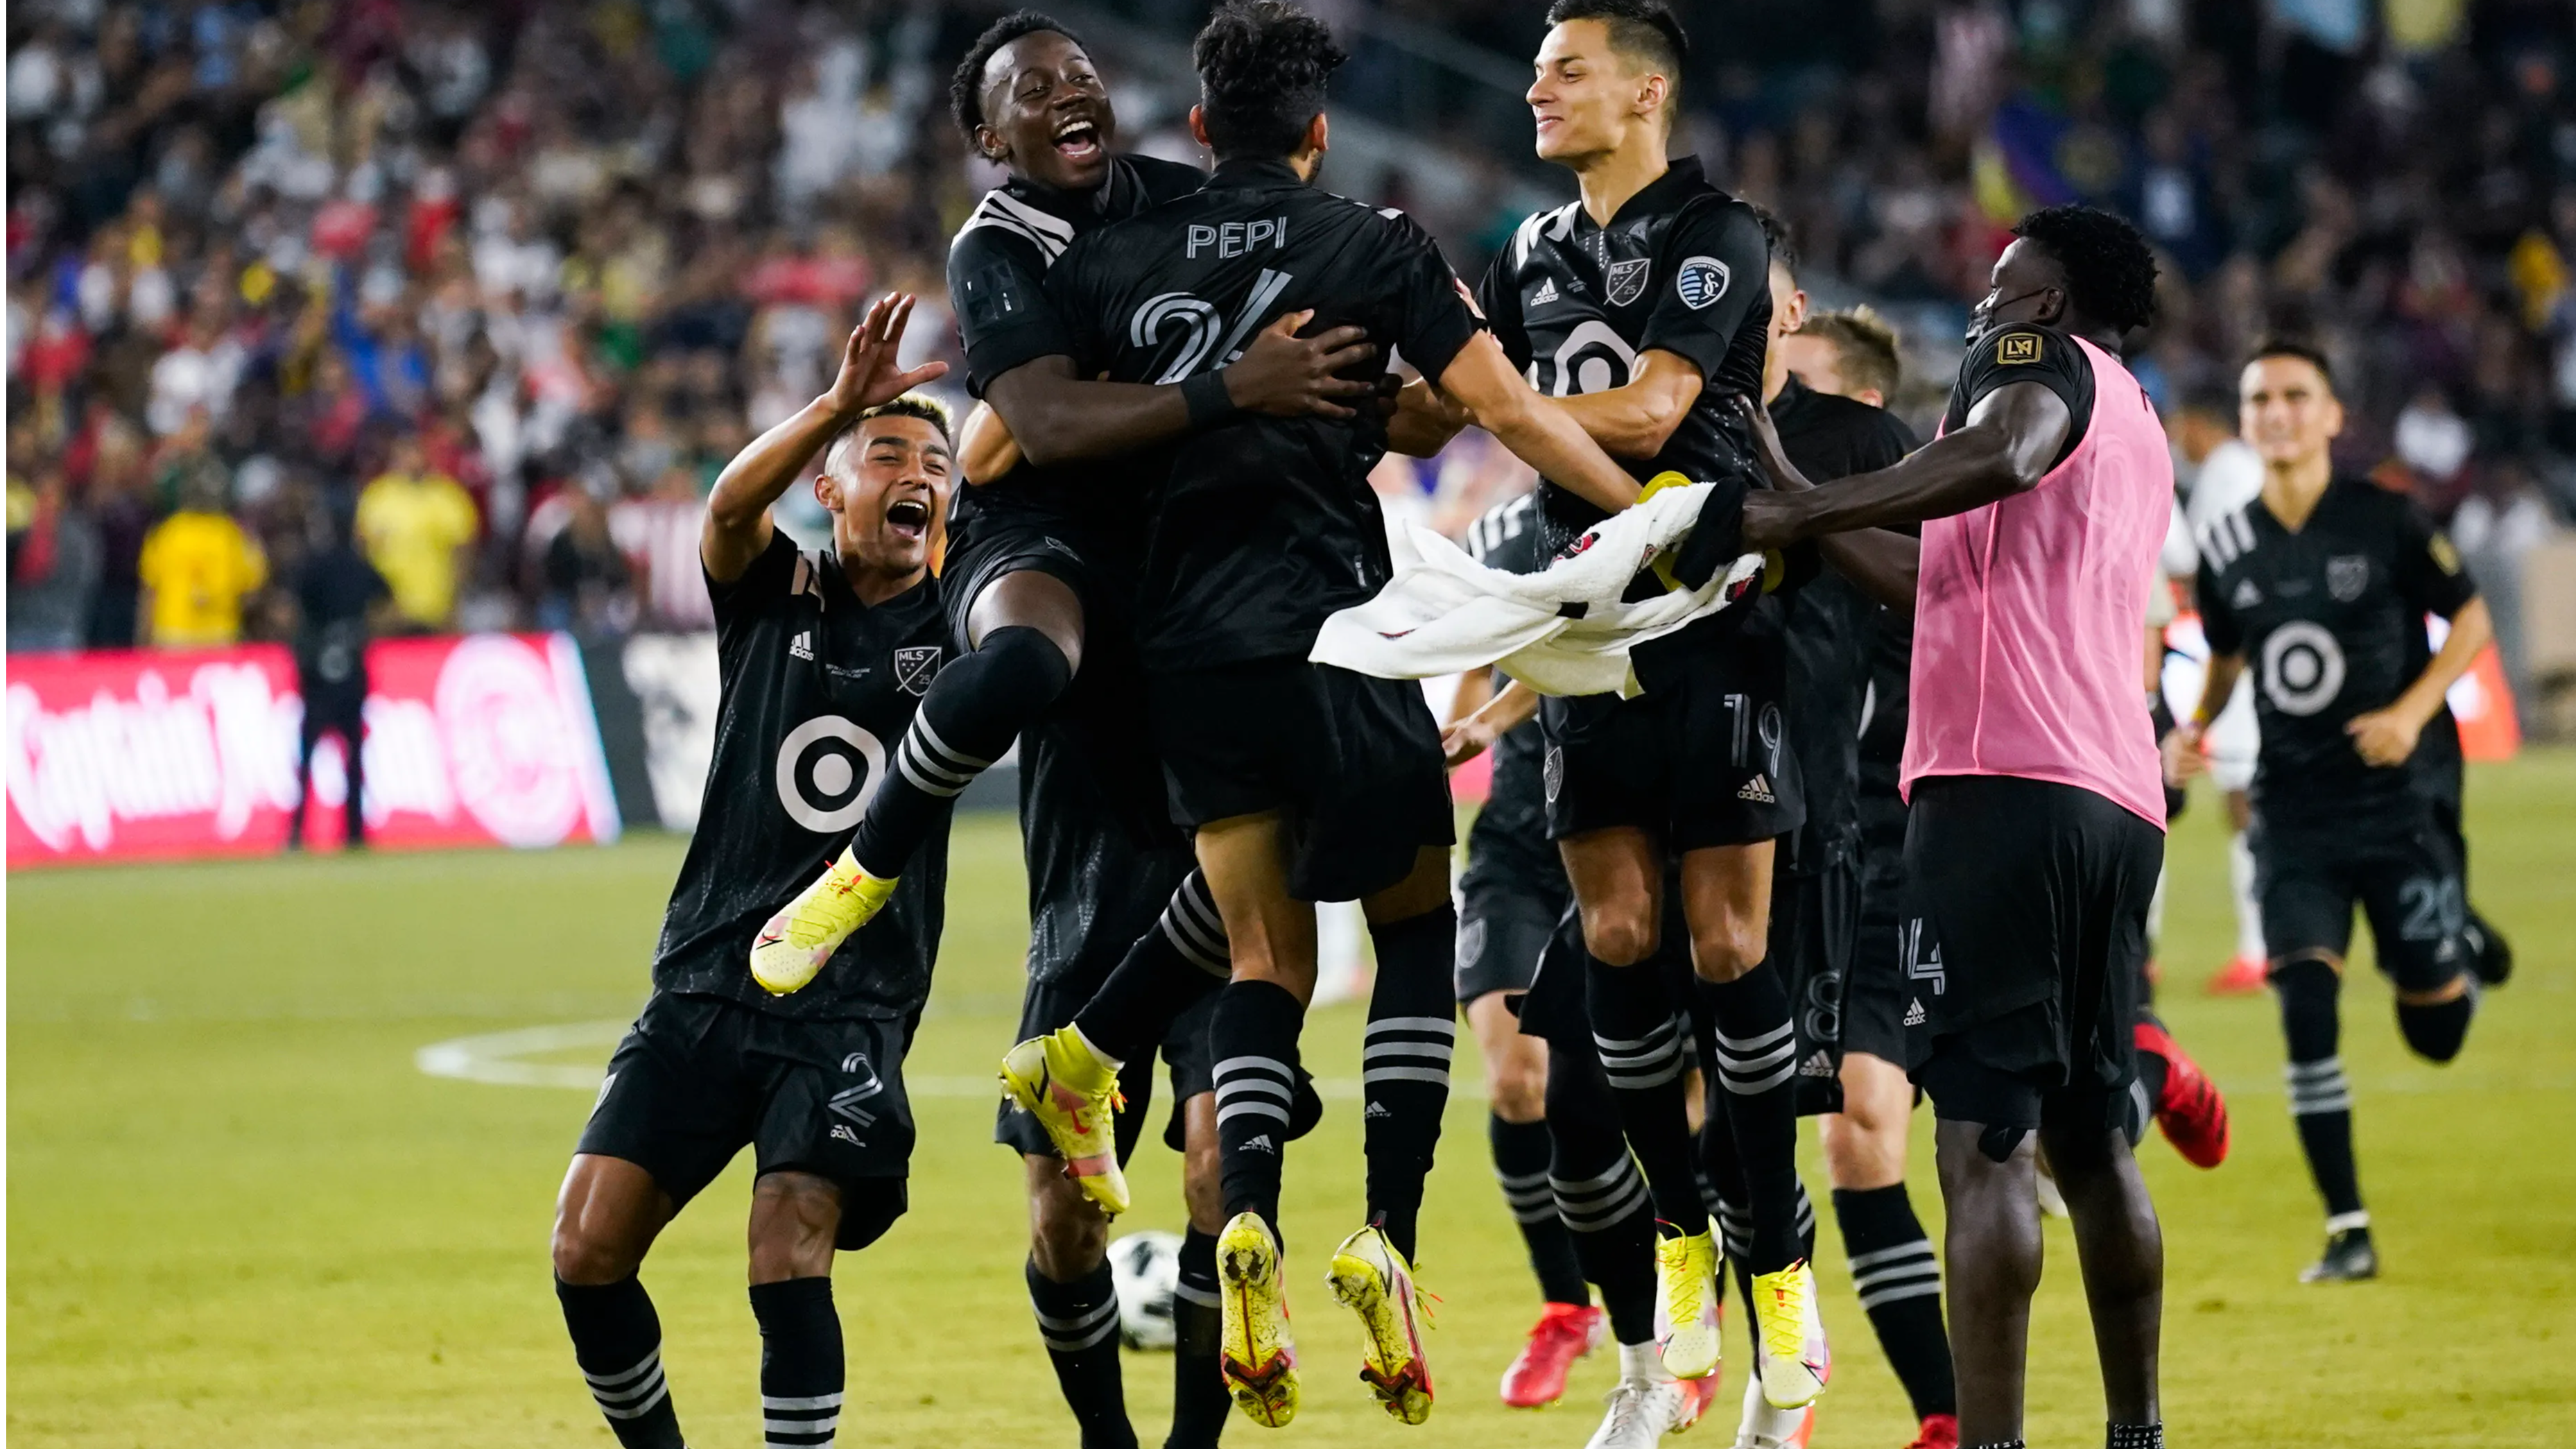 MLS pips Liga MX in penalties to seal the MLS All-Star Game